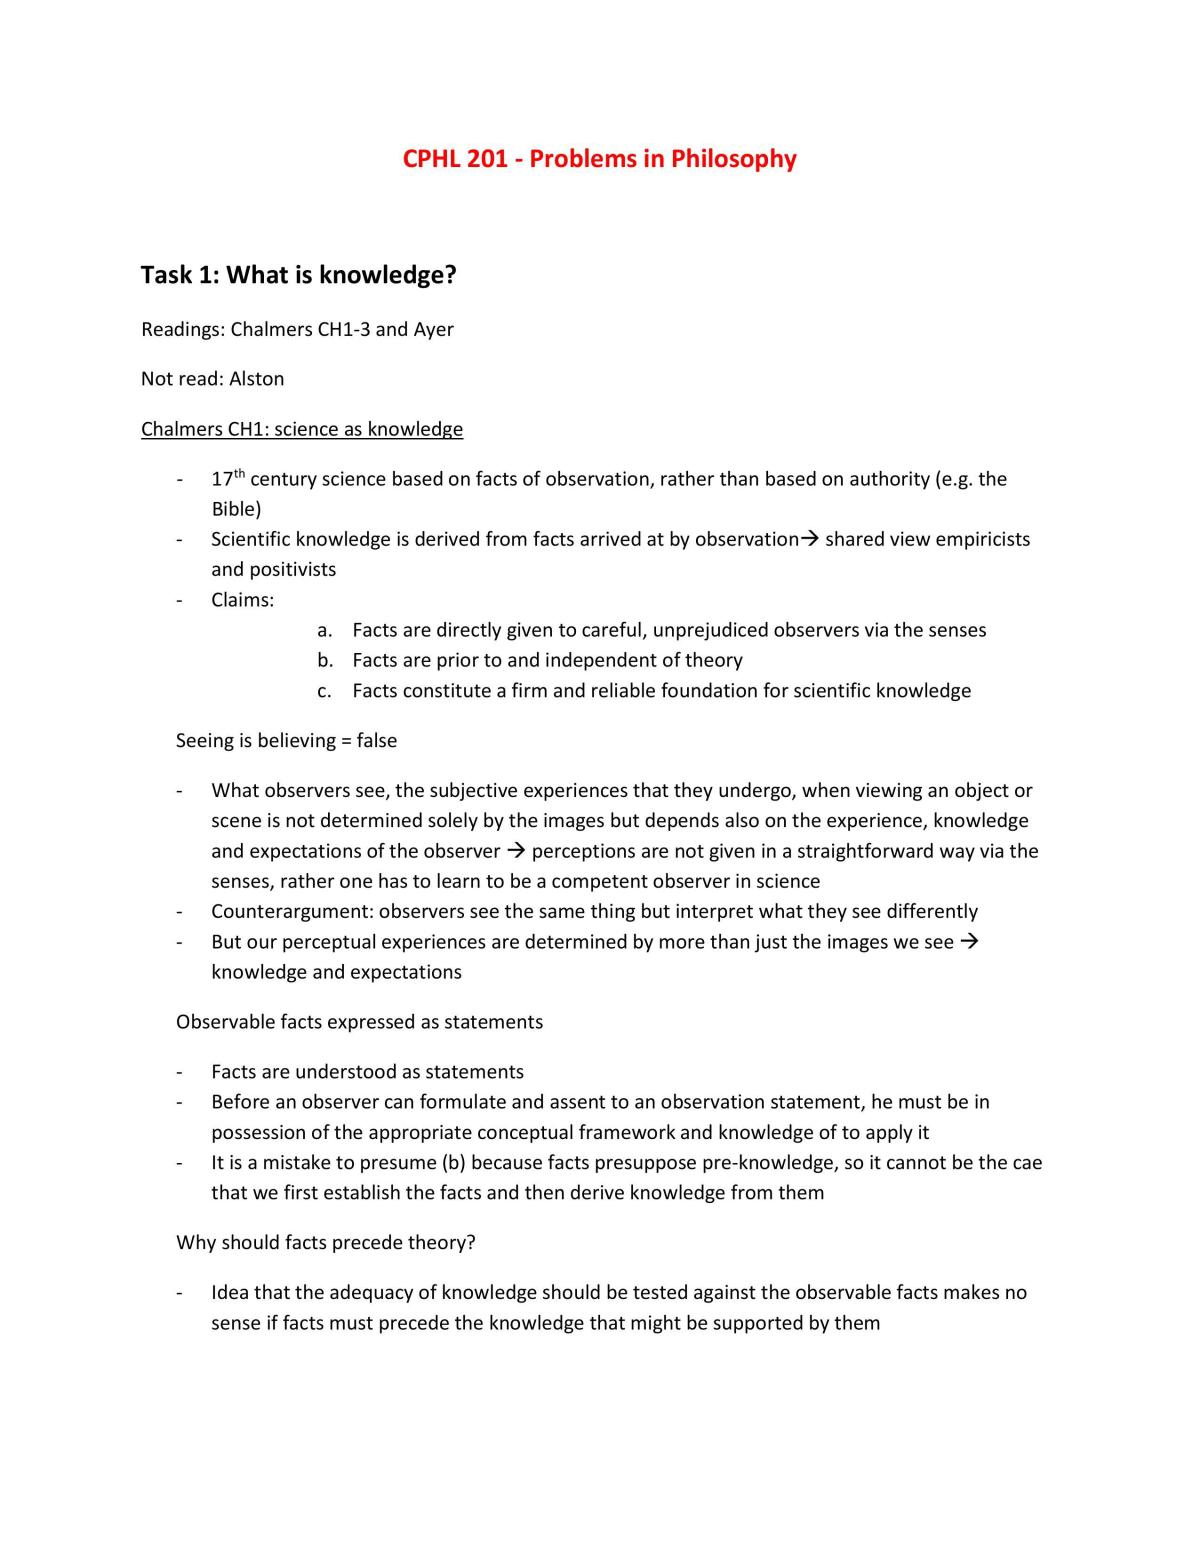 Problems in Philosophy - Review - Page 1